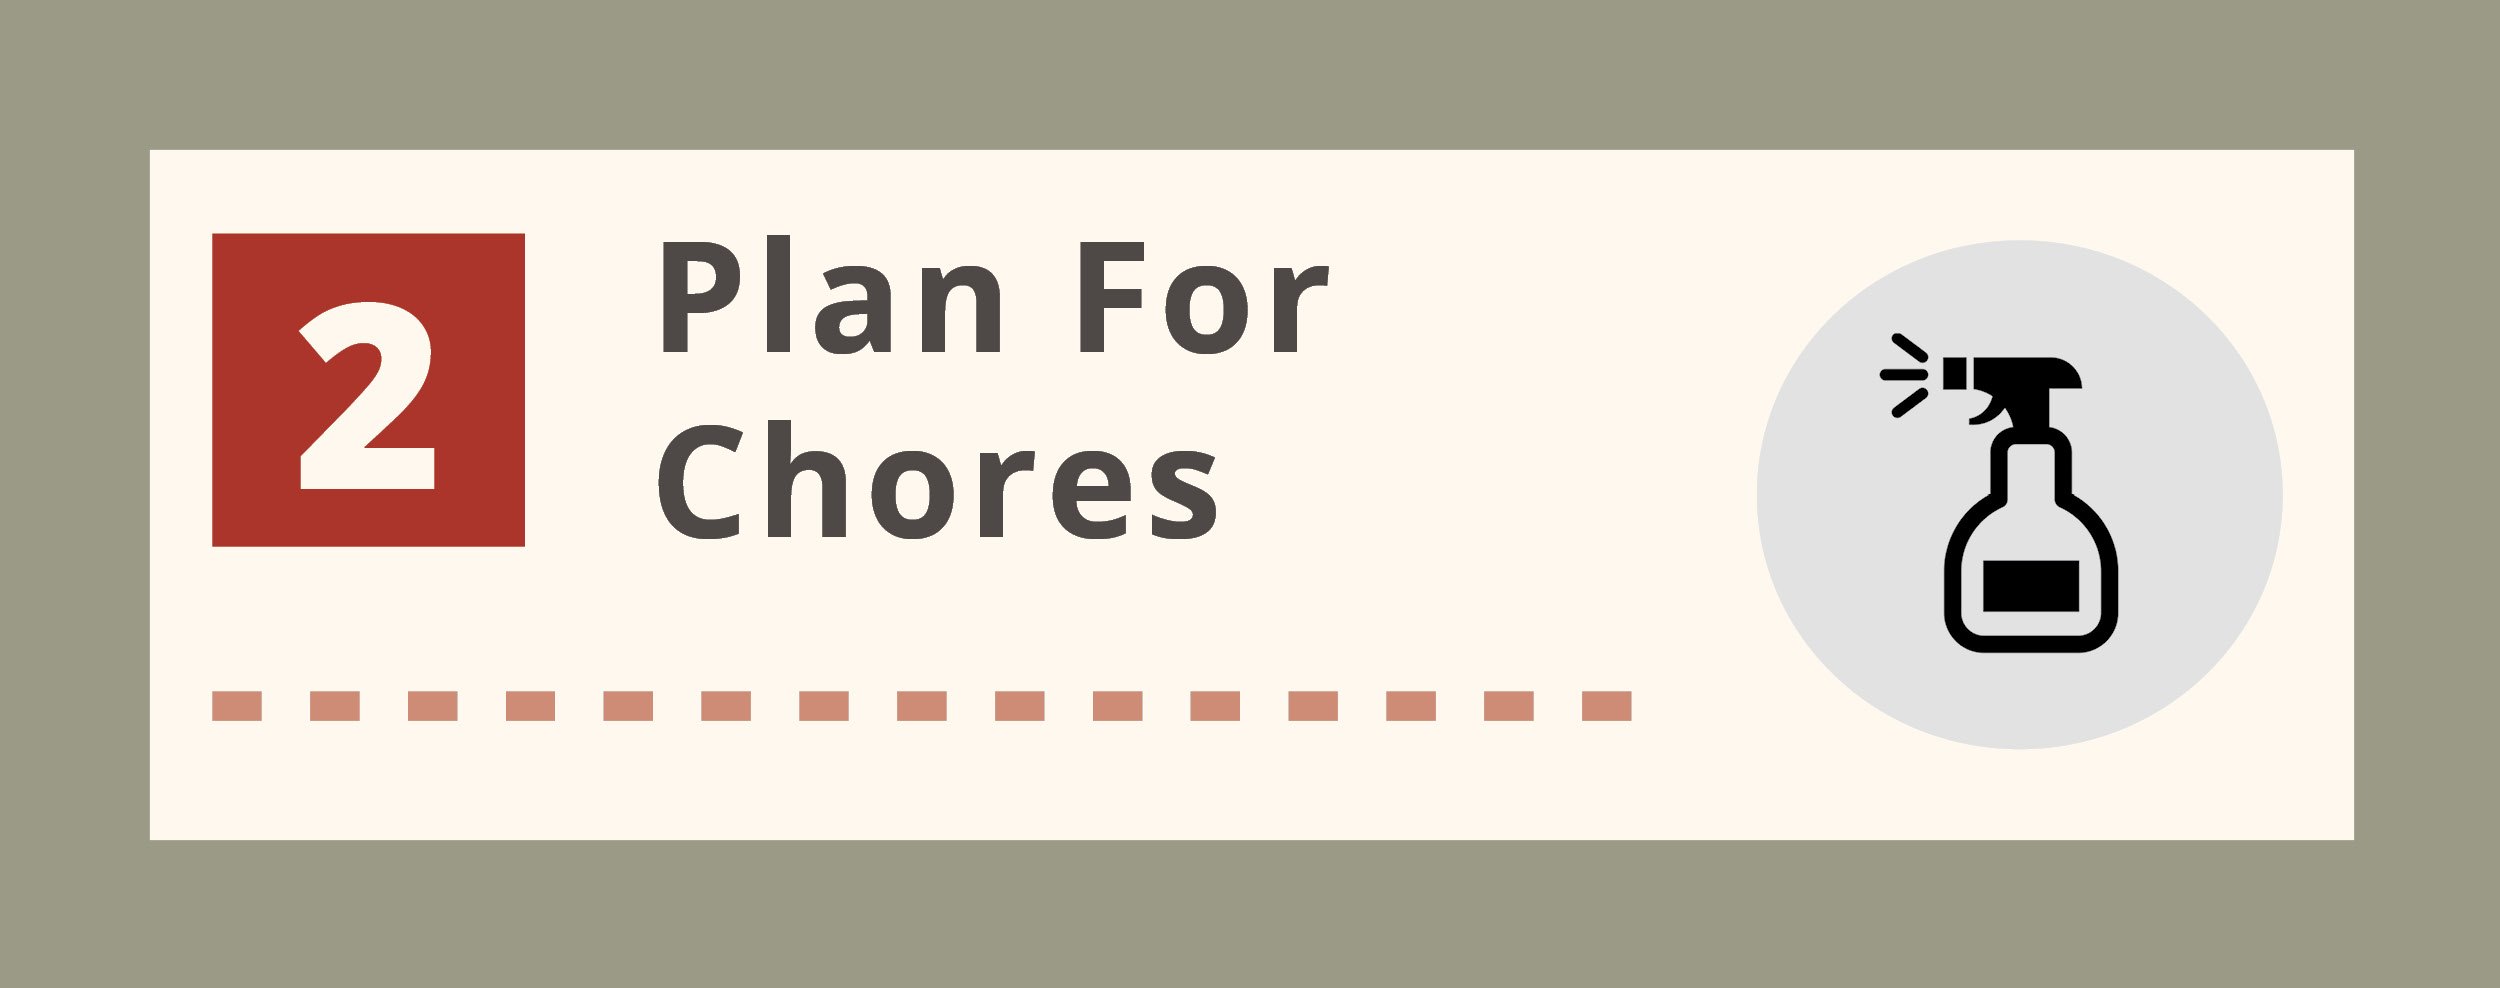 Plan for chores